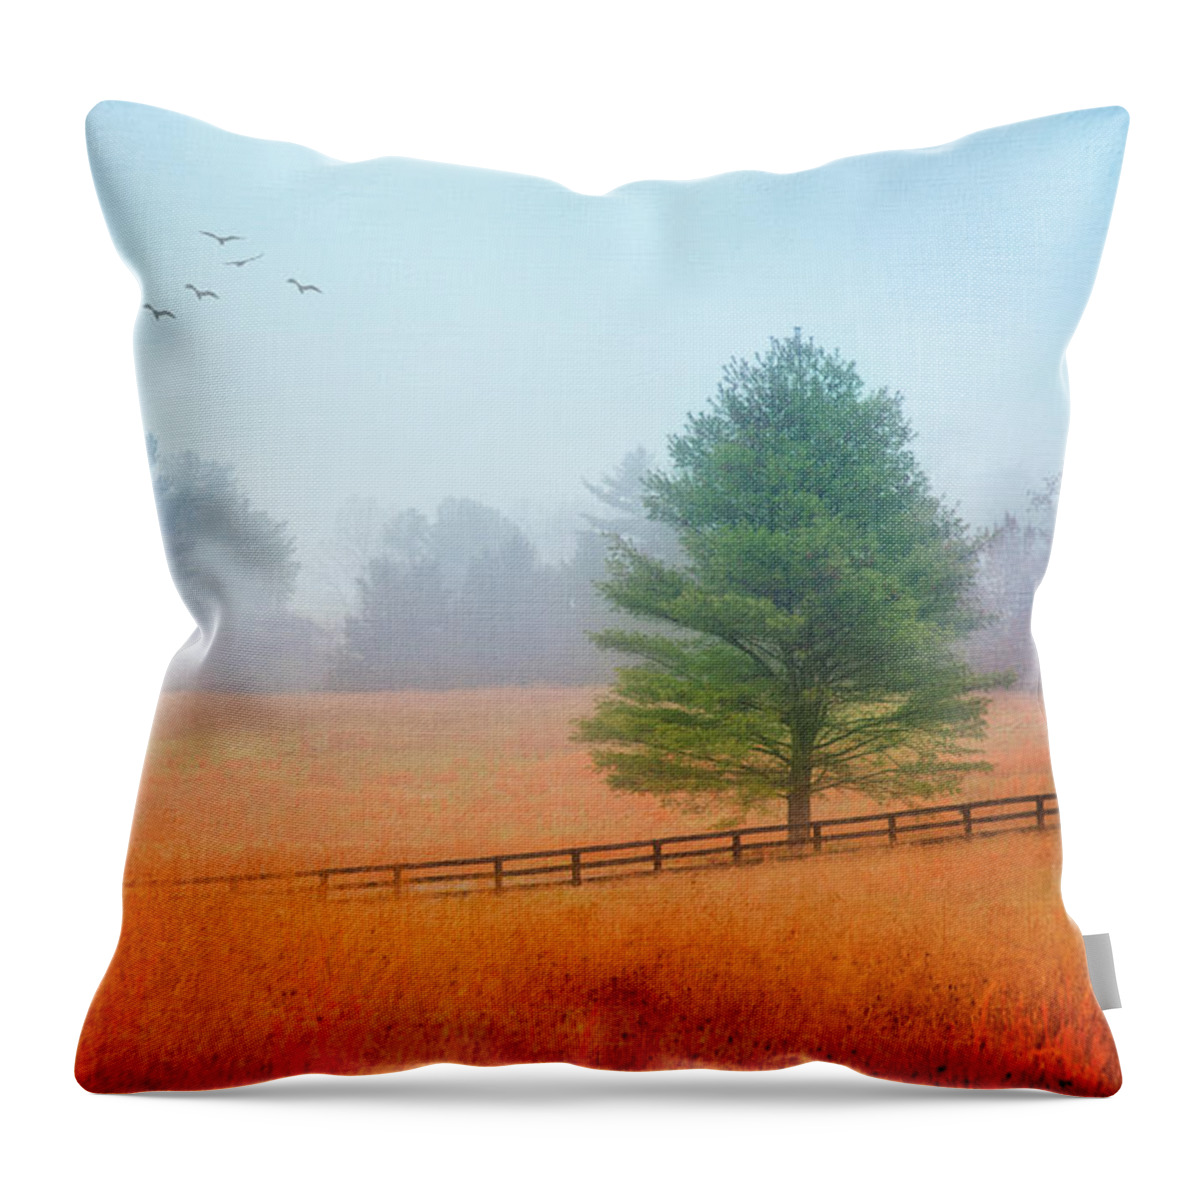 Landscape Throw Pillow featuring the photograph As Lonely As The Autumn Wind by Iryna Goodall